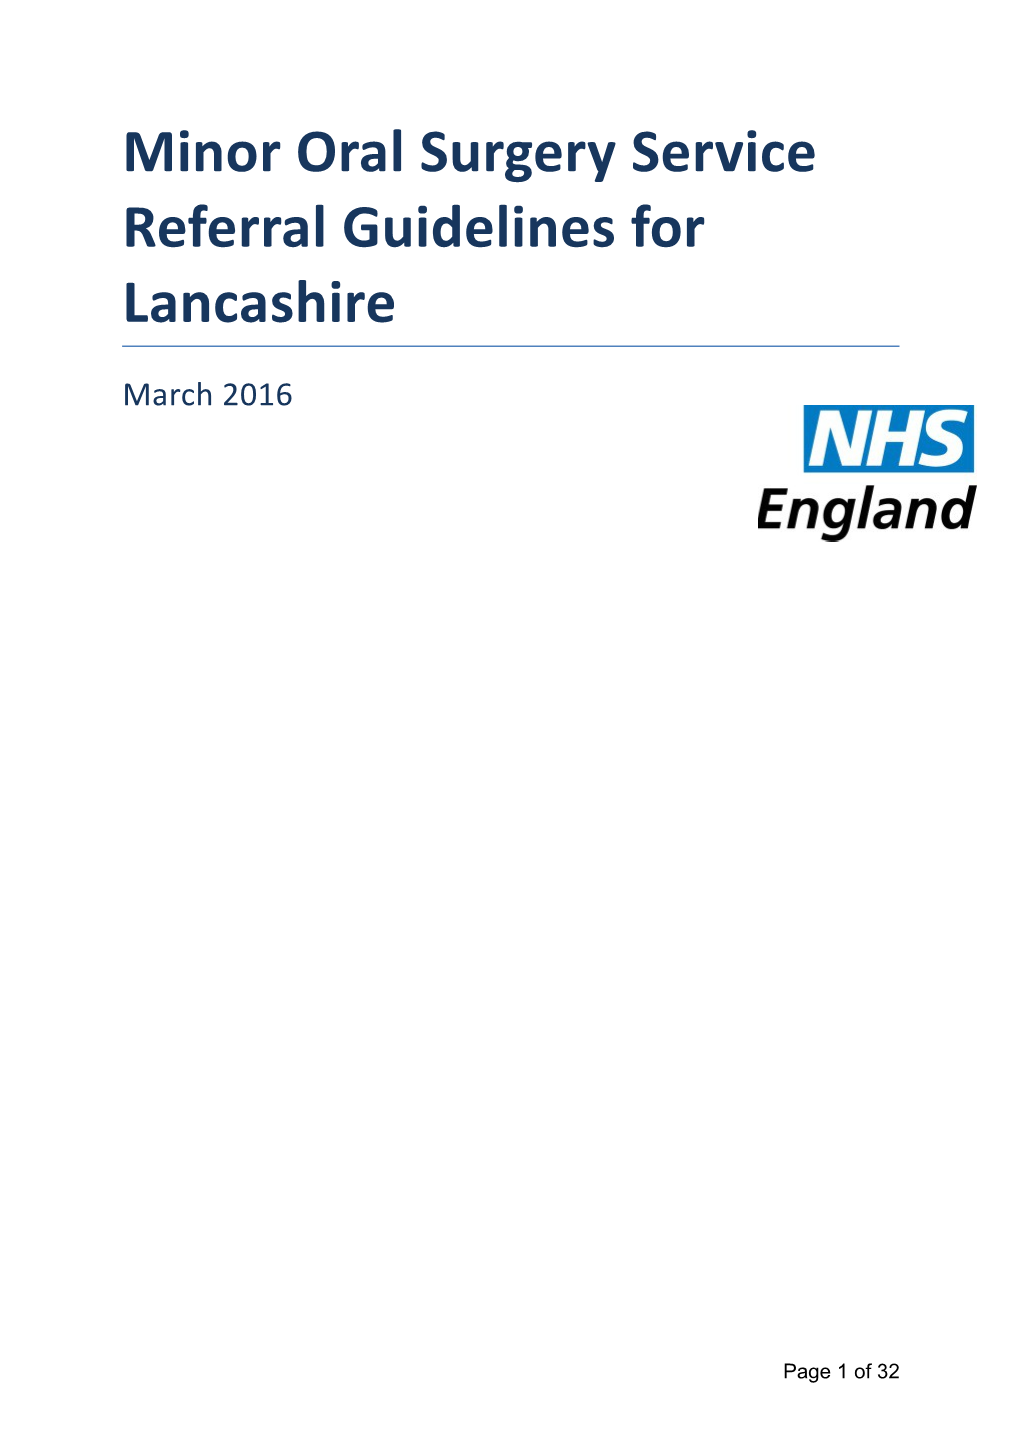 Minor Oral Surgery Service Referral Guidelines For Lancashire